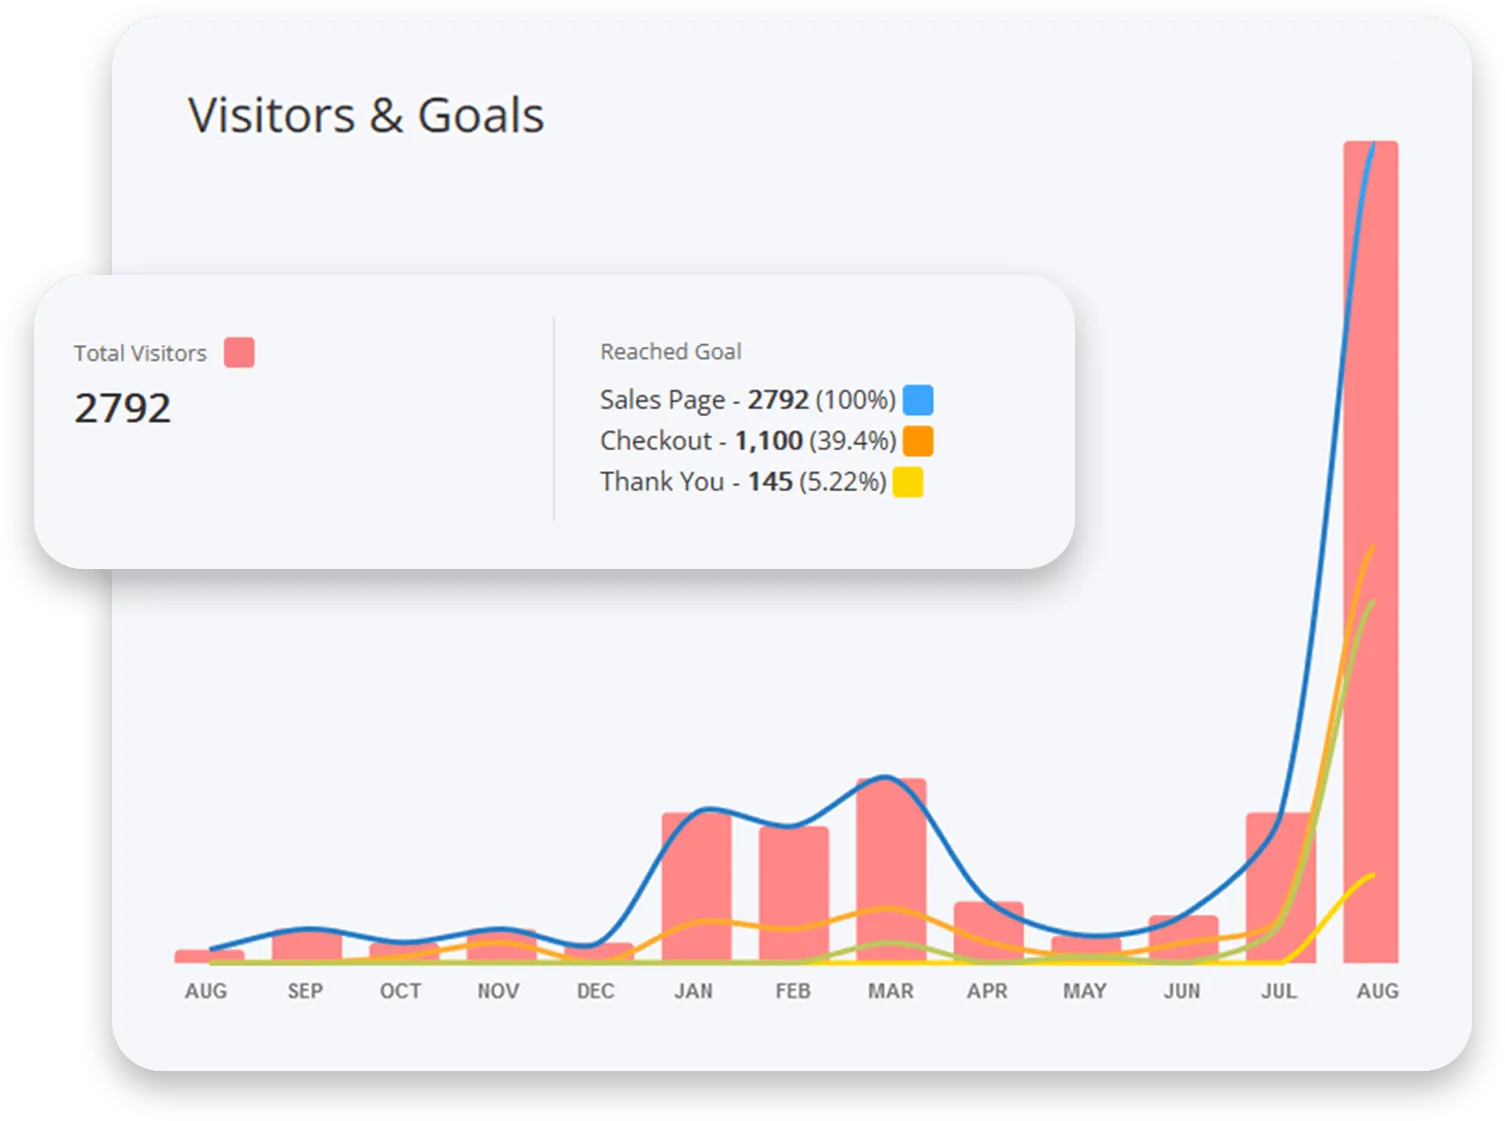 Bar graph showing monthly visitor stats and goal completion rates for a website, with a sharp increase in August.